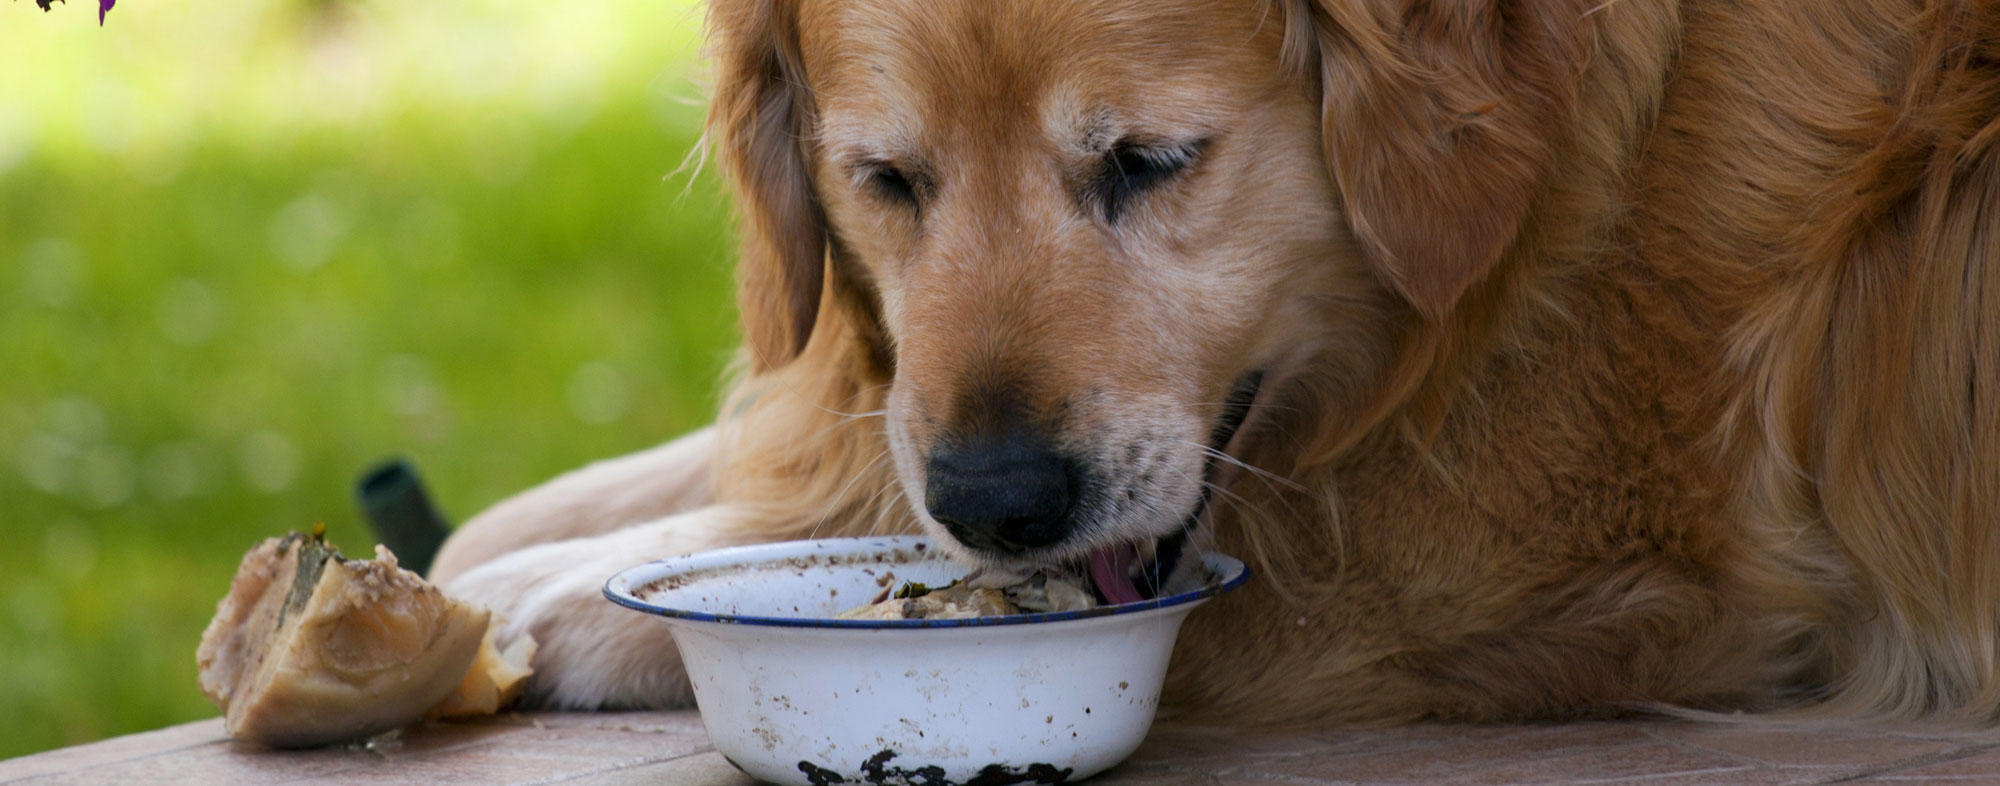 Human Foods for Dogs: Which Table 